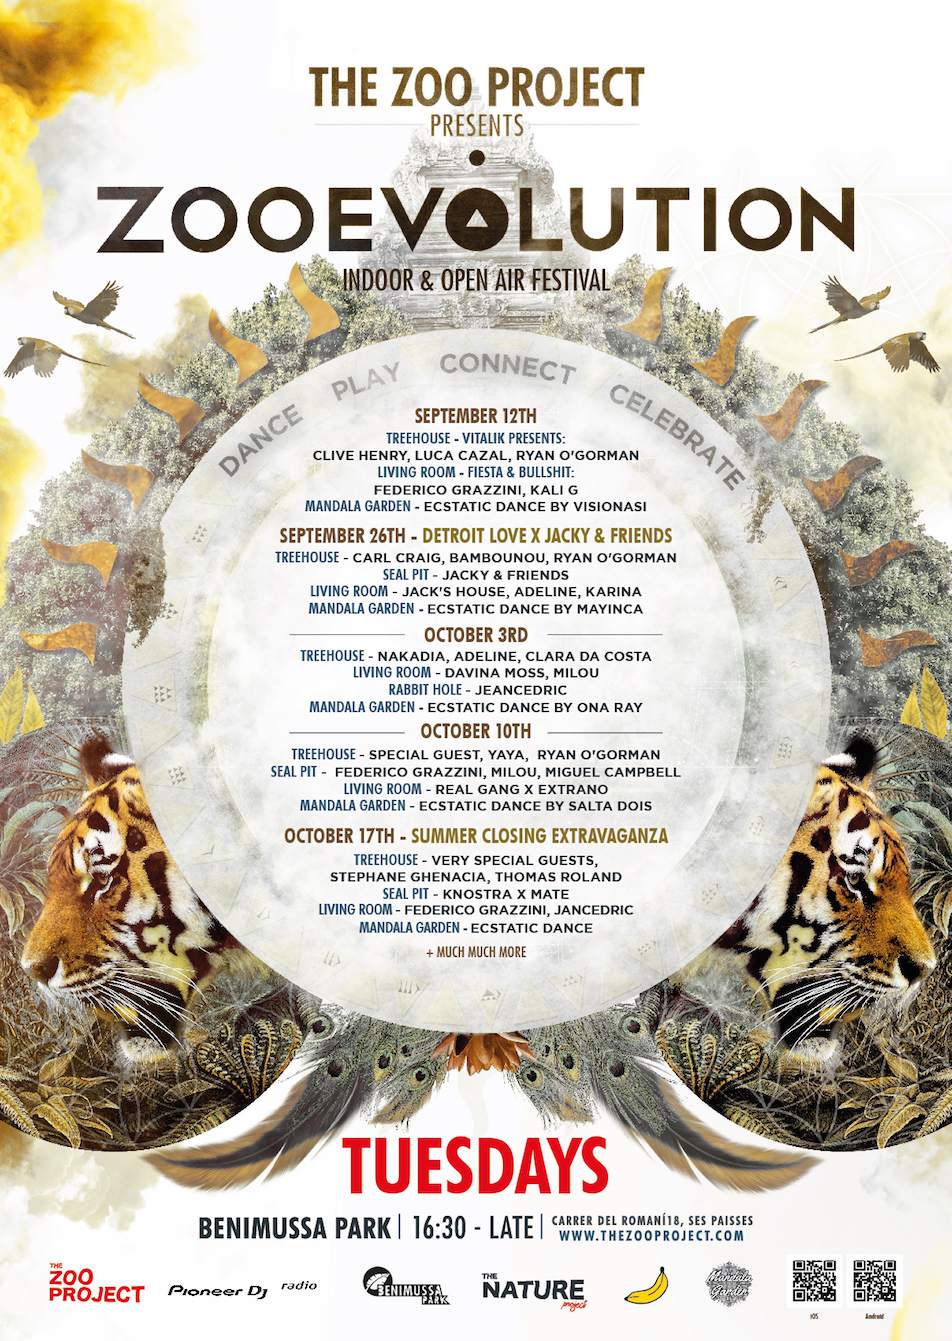 The Zoo Project Evolution returns after brief hiatus with Carl Craig, Bambounou image